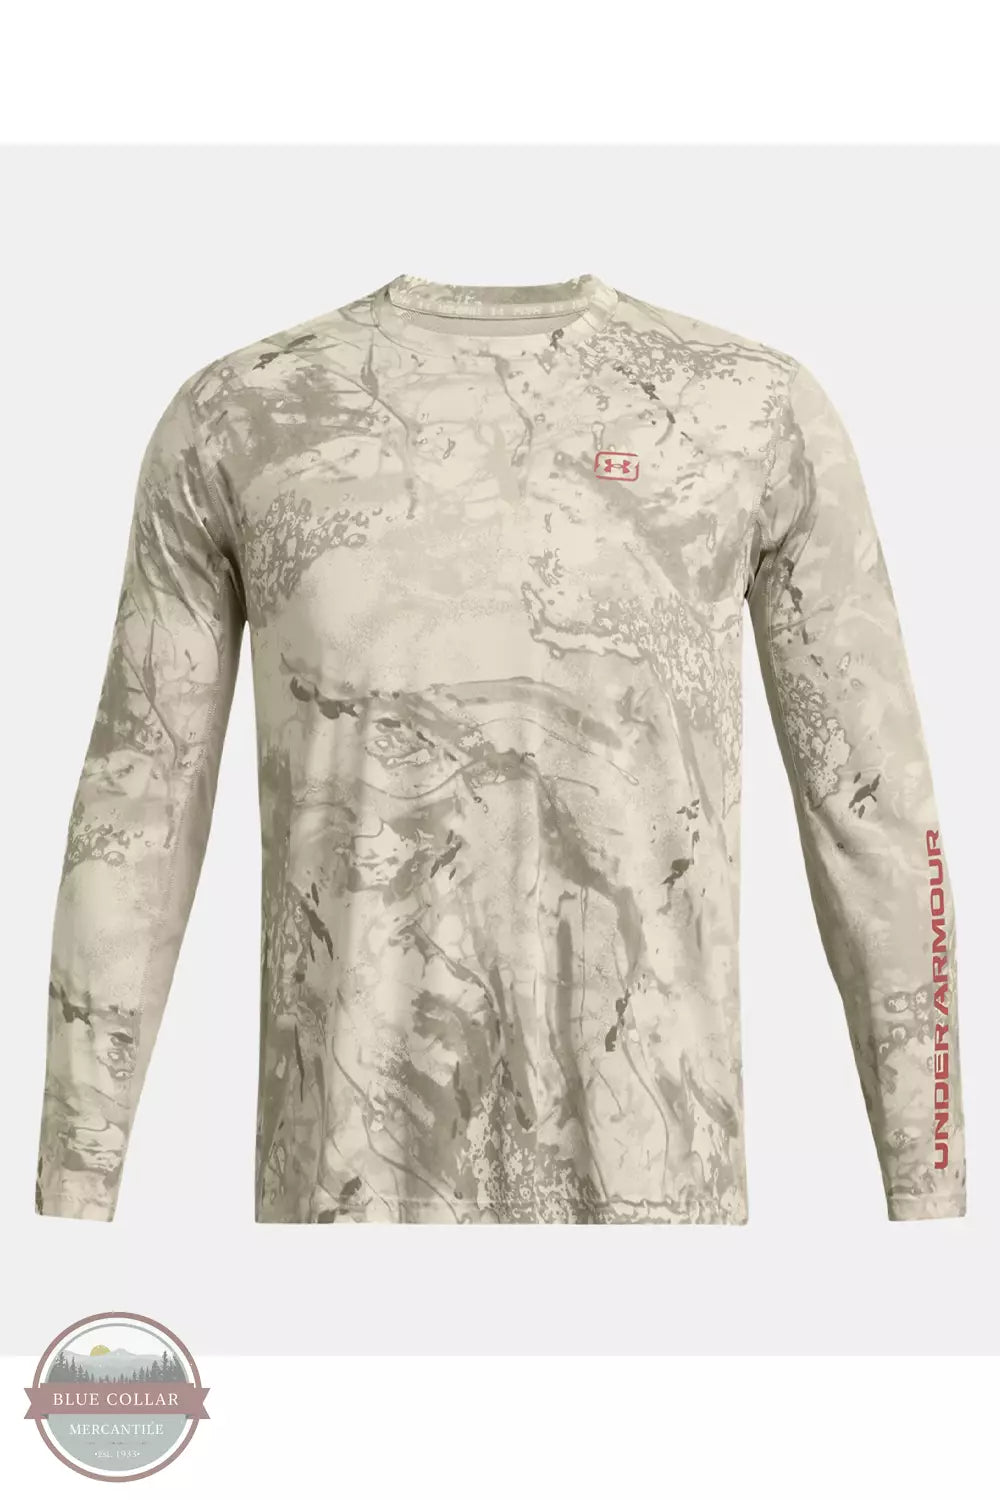 Fish Pro Chill Camo Long Sleeve Shirt by Under Armour 1383573